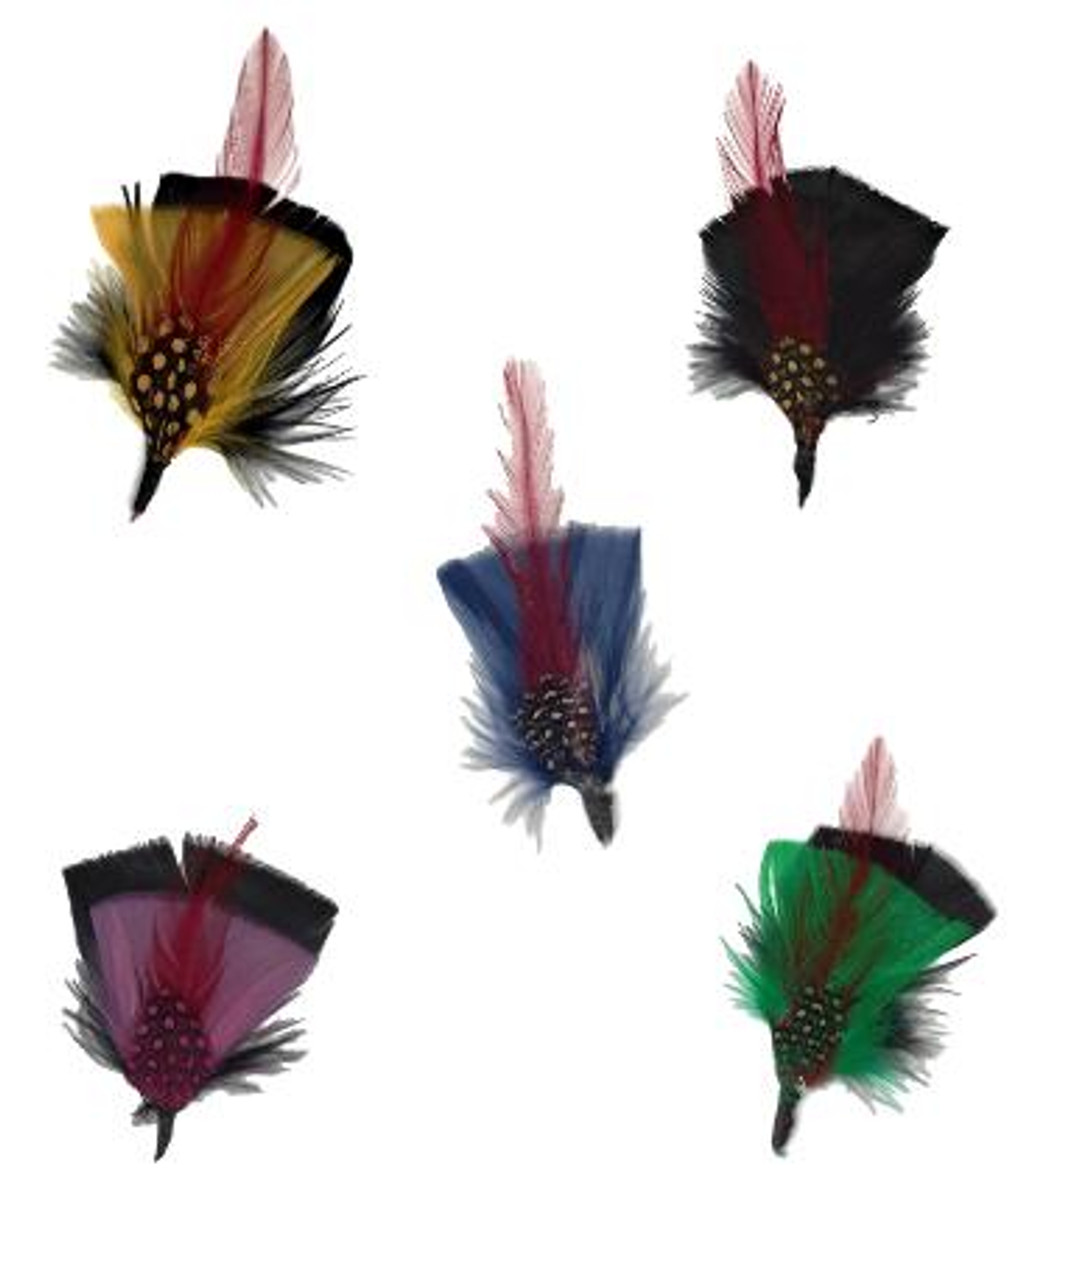 20 Pcs Hat Feathers, Assorted Feathers for Fedora Hats Colorful